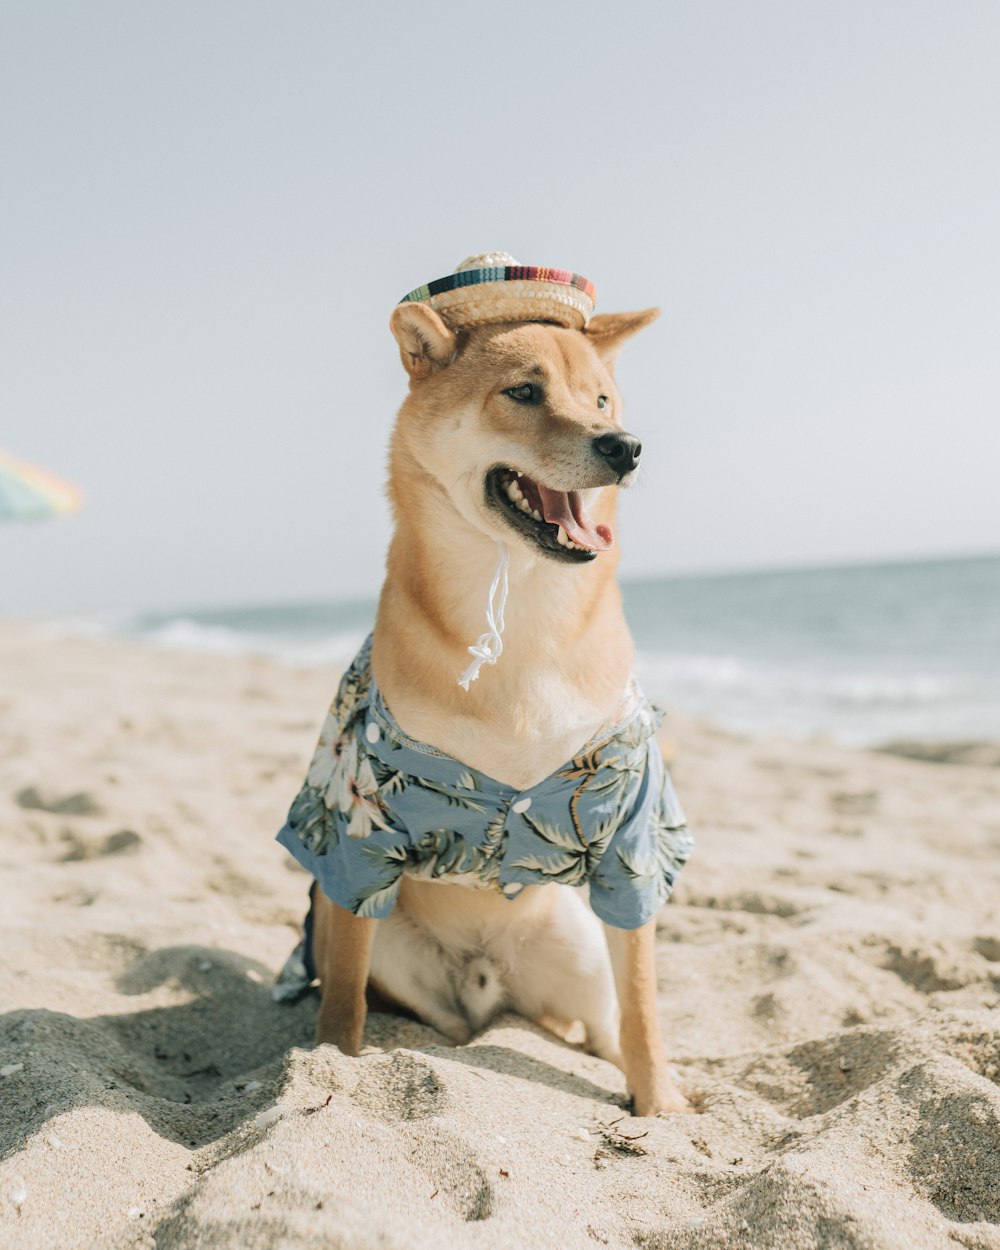 brown short coated dog wearing blue and white polka dot scarf on beach during daytime